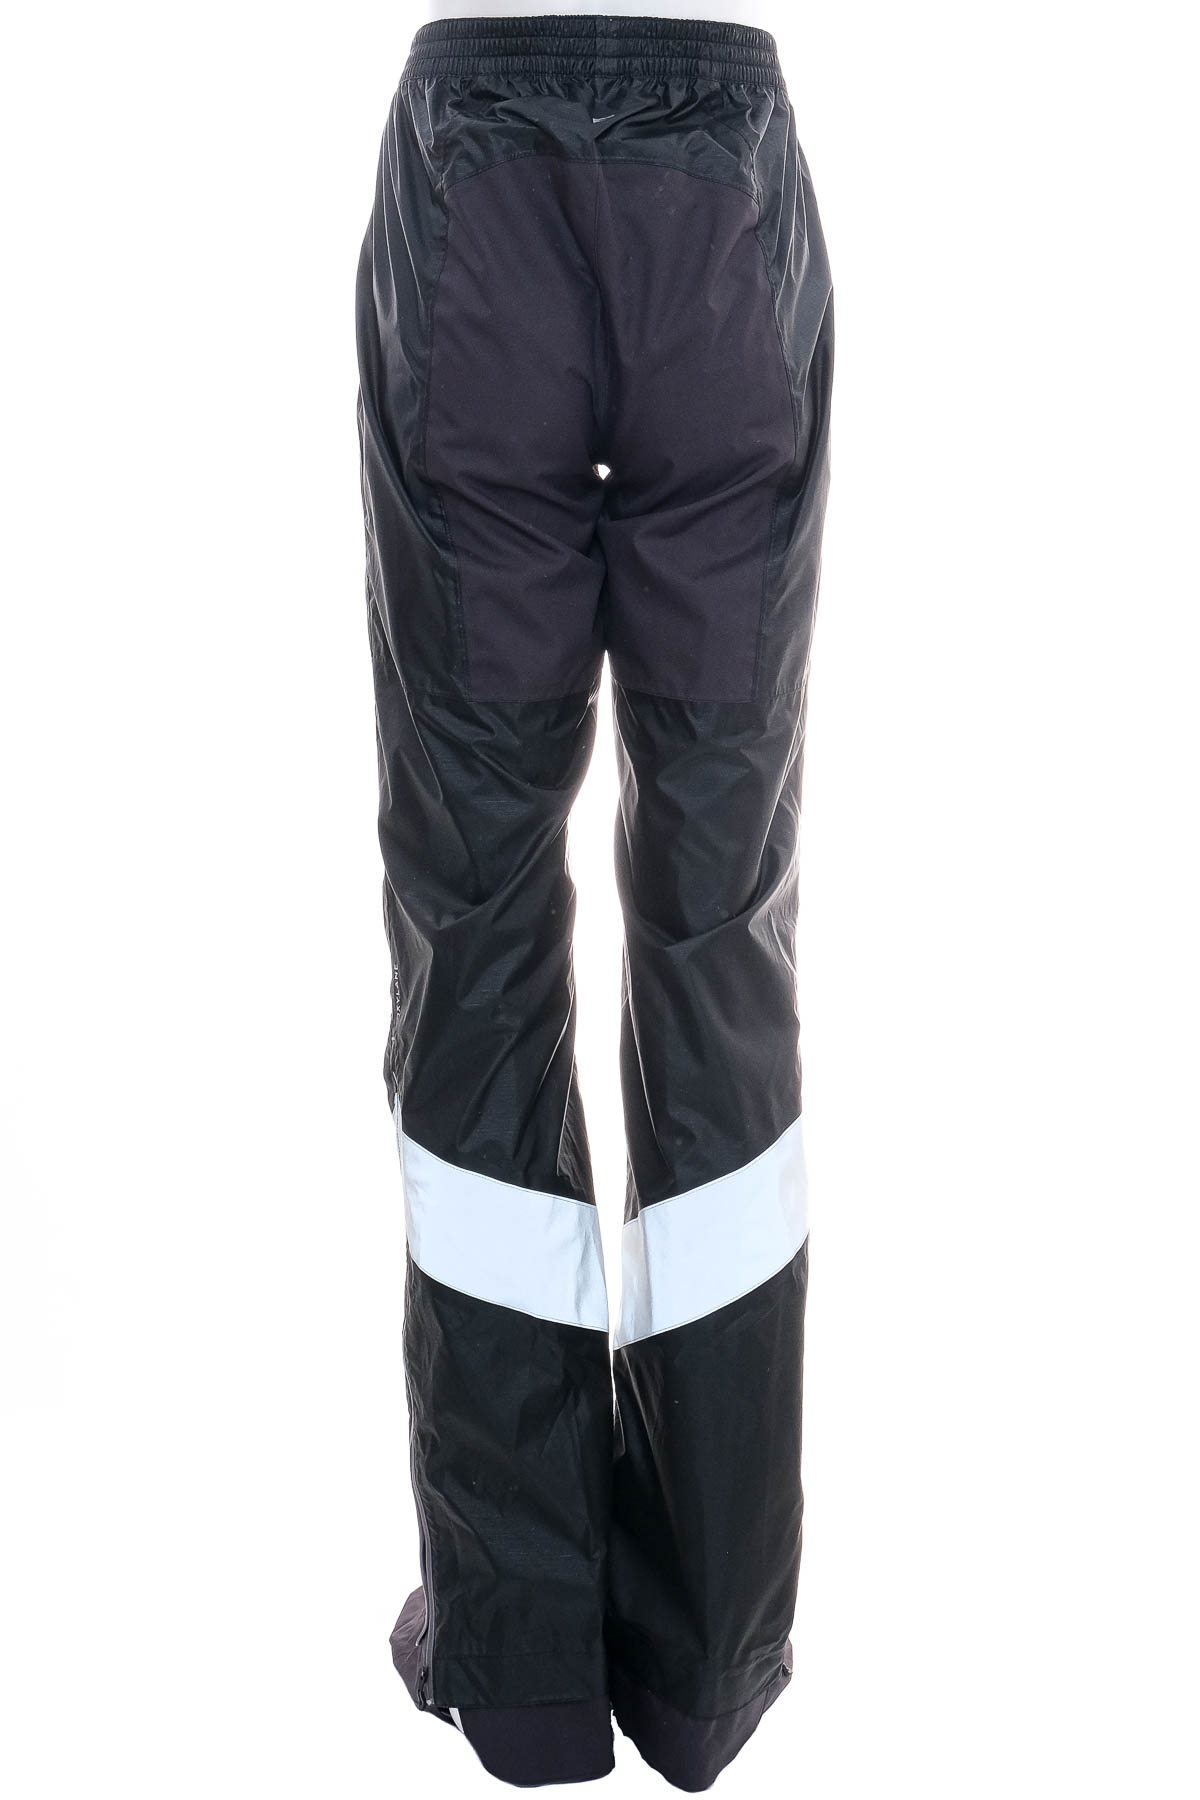 Men's trousers for cycling - DECATHLON - 1